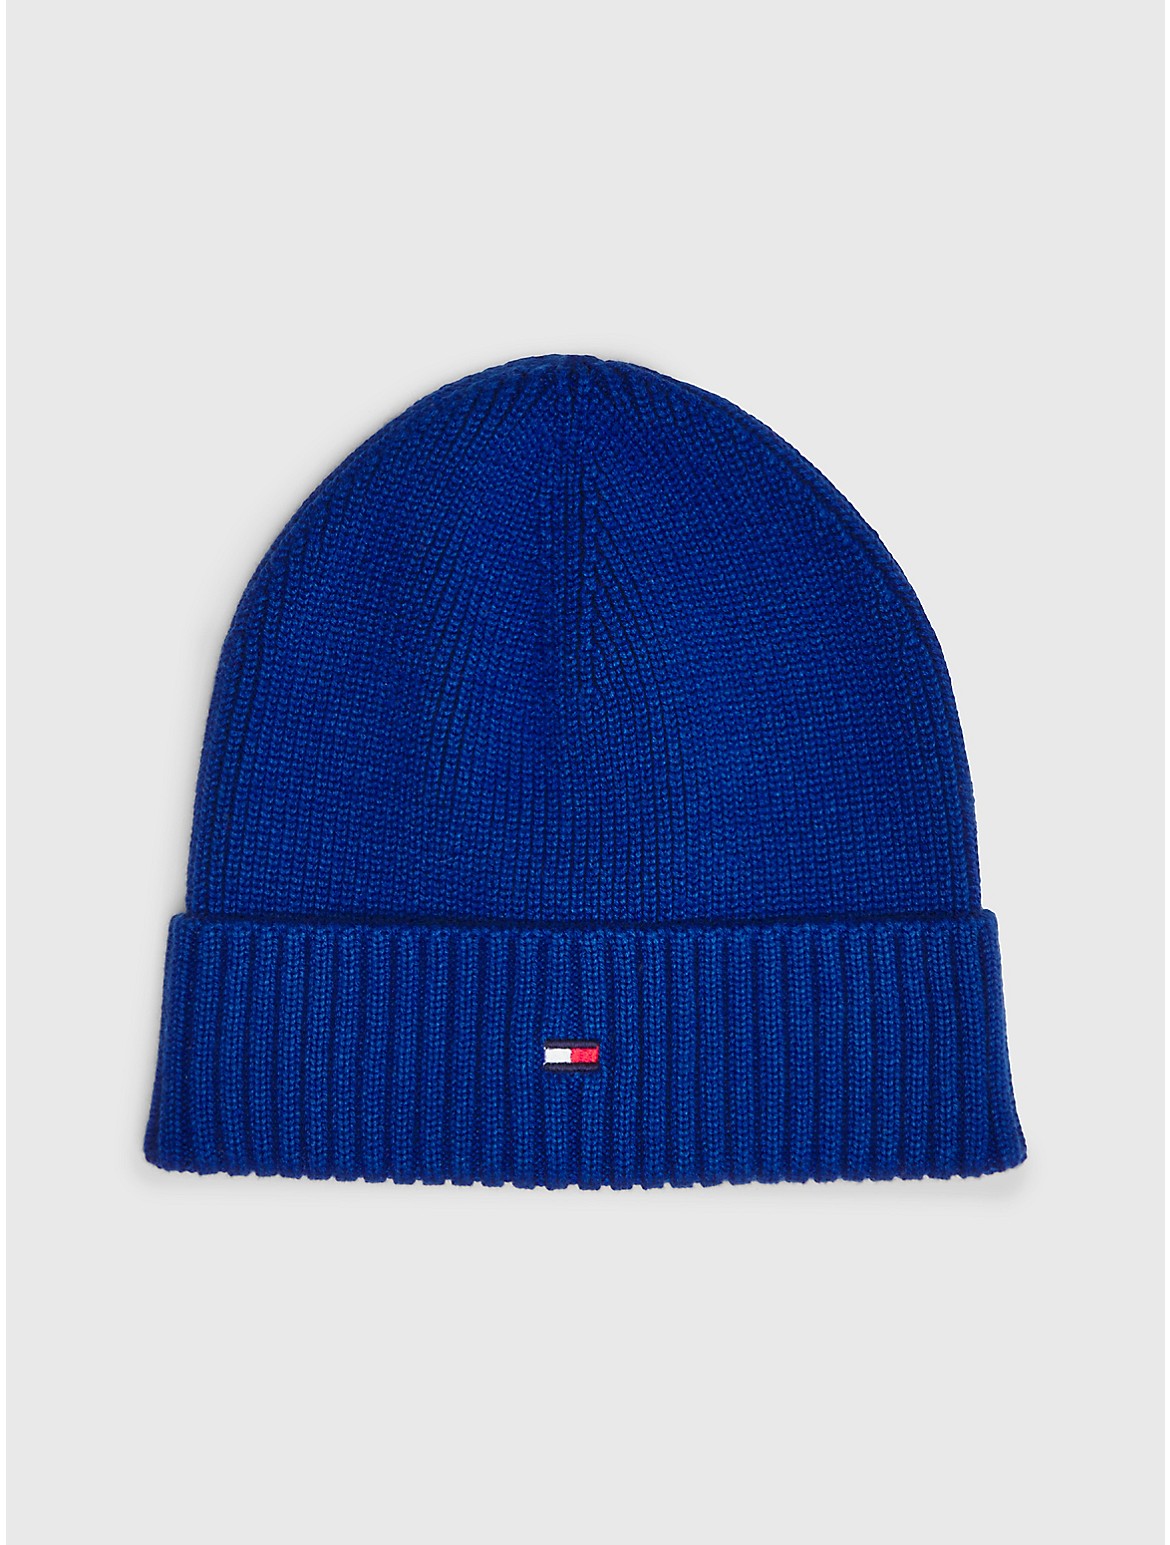 Tommy Hilfiger Kids' Solid Microflag Logo Beanie - Blue - S-M